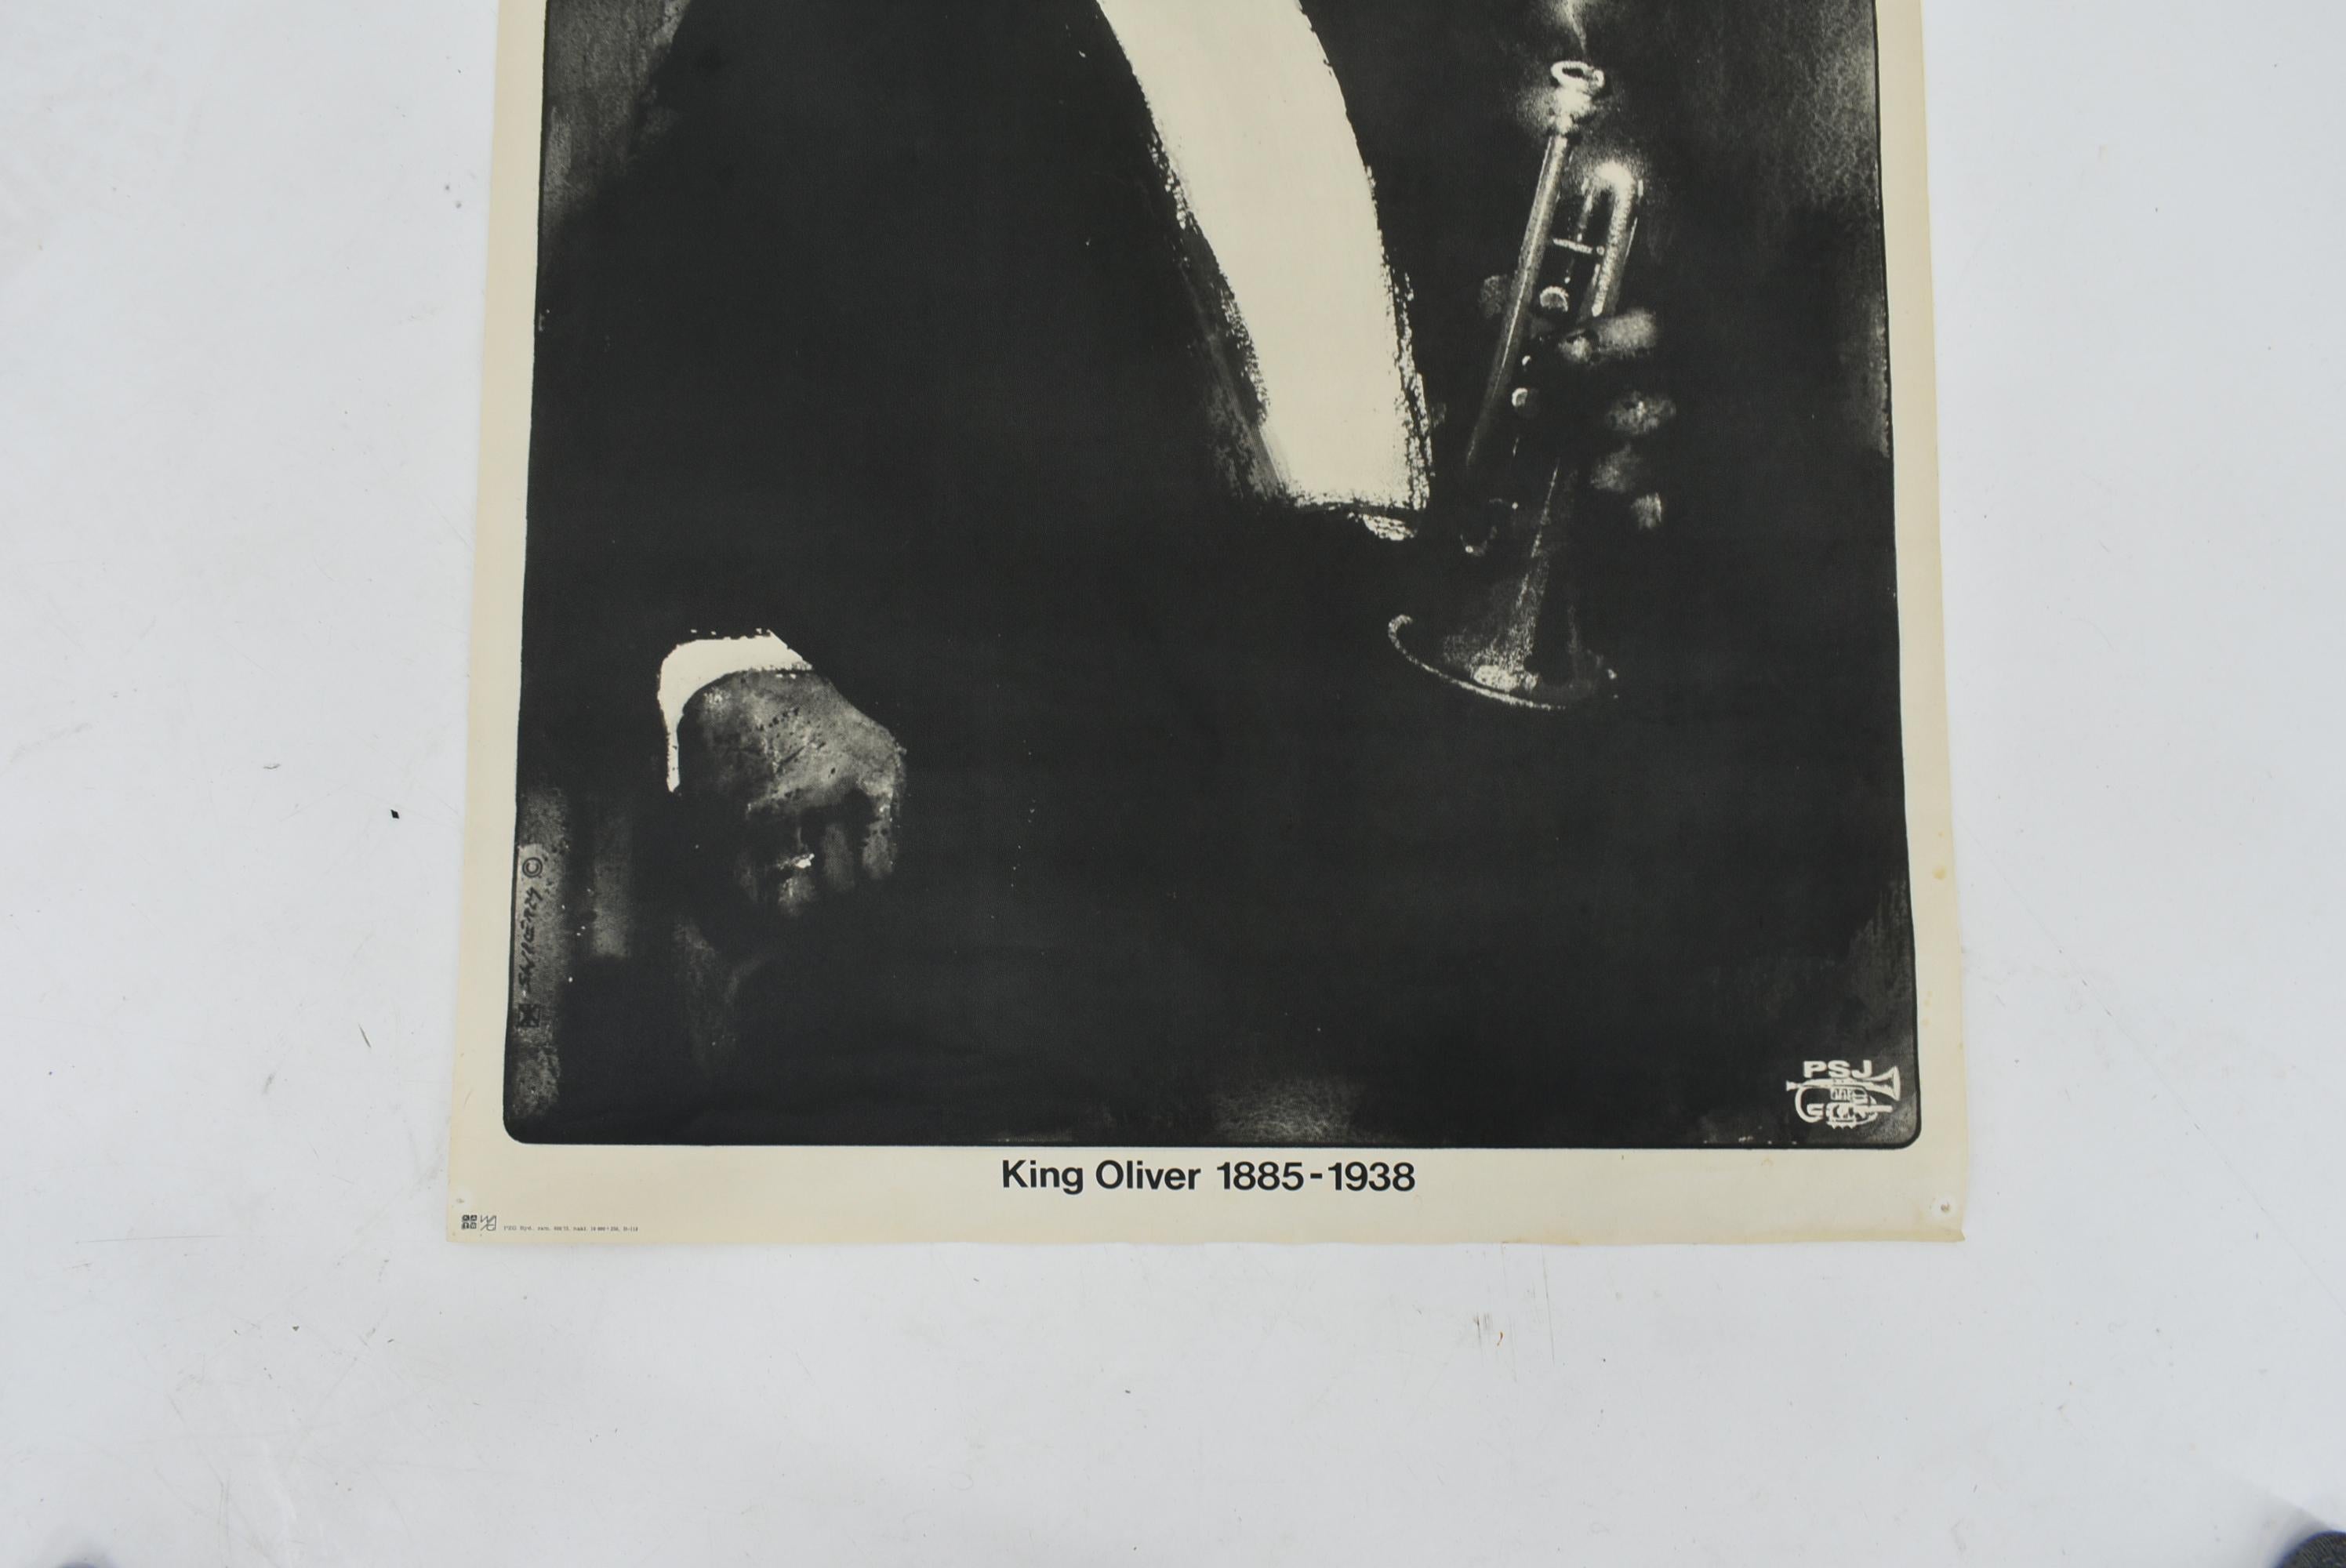 Rare Original Jazz Poster of King Oliver '1885-1938' by Swierzy For Sale 2